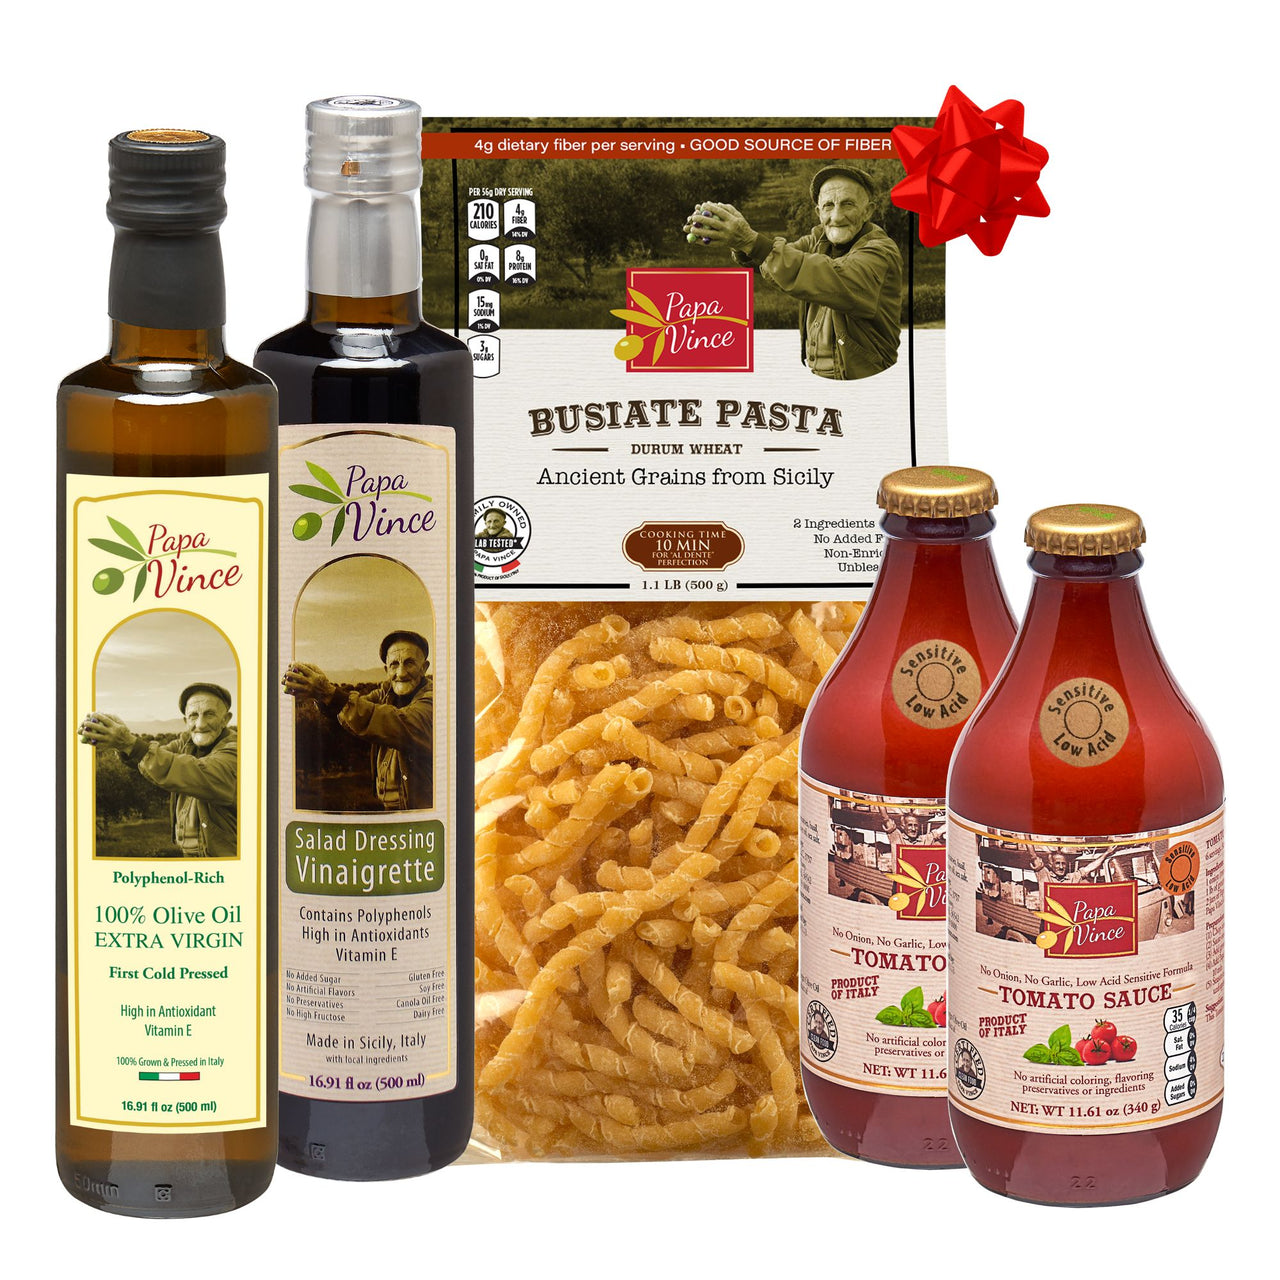 Food Basket Gift from Sicily - Gourmet Farm Fresh Clean Food from Artisans in Italy | Extra Virgin Olive Oil, Salad Dressing, Busiate Durum Pasta, Cherry Tomato Sauce | Papa Vince